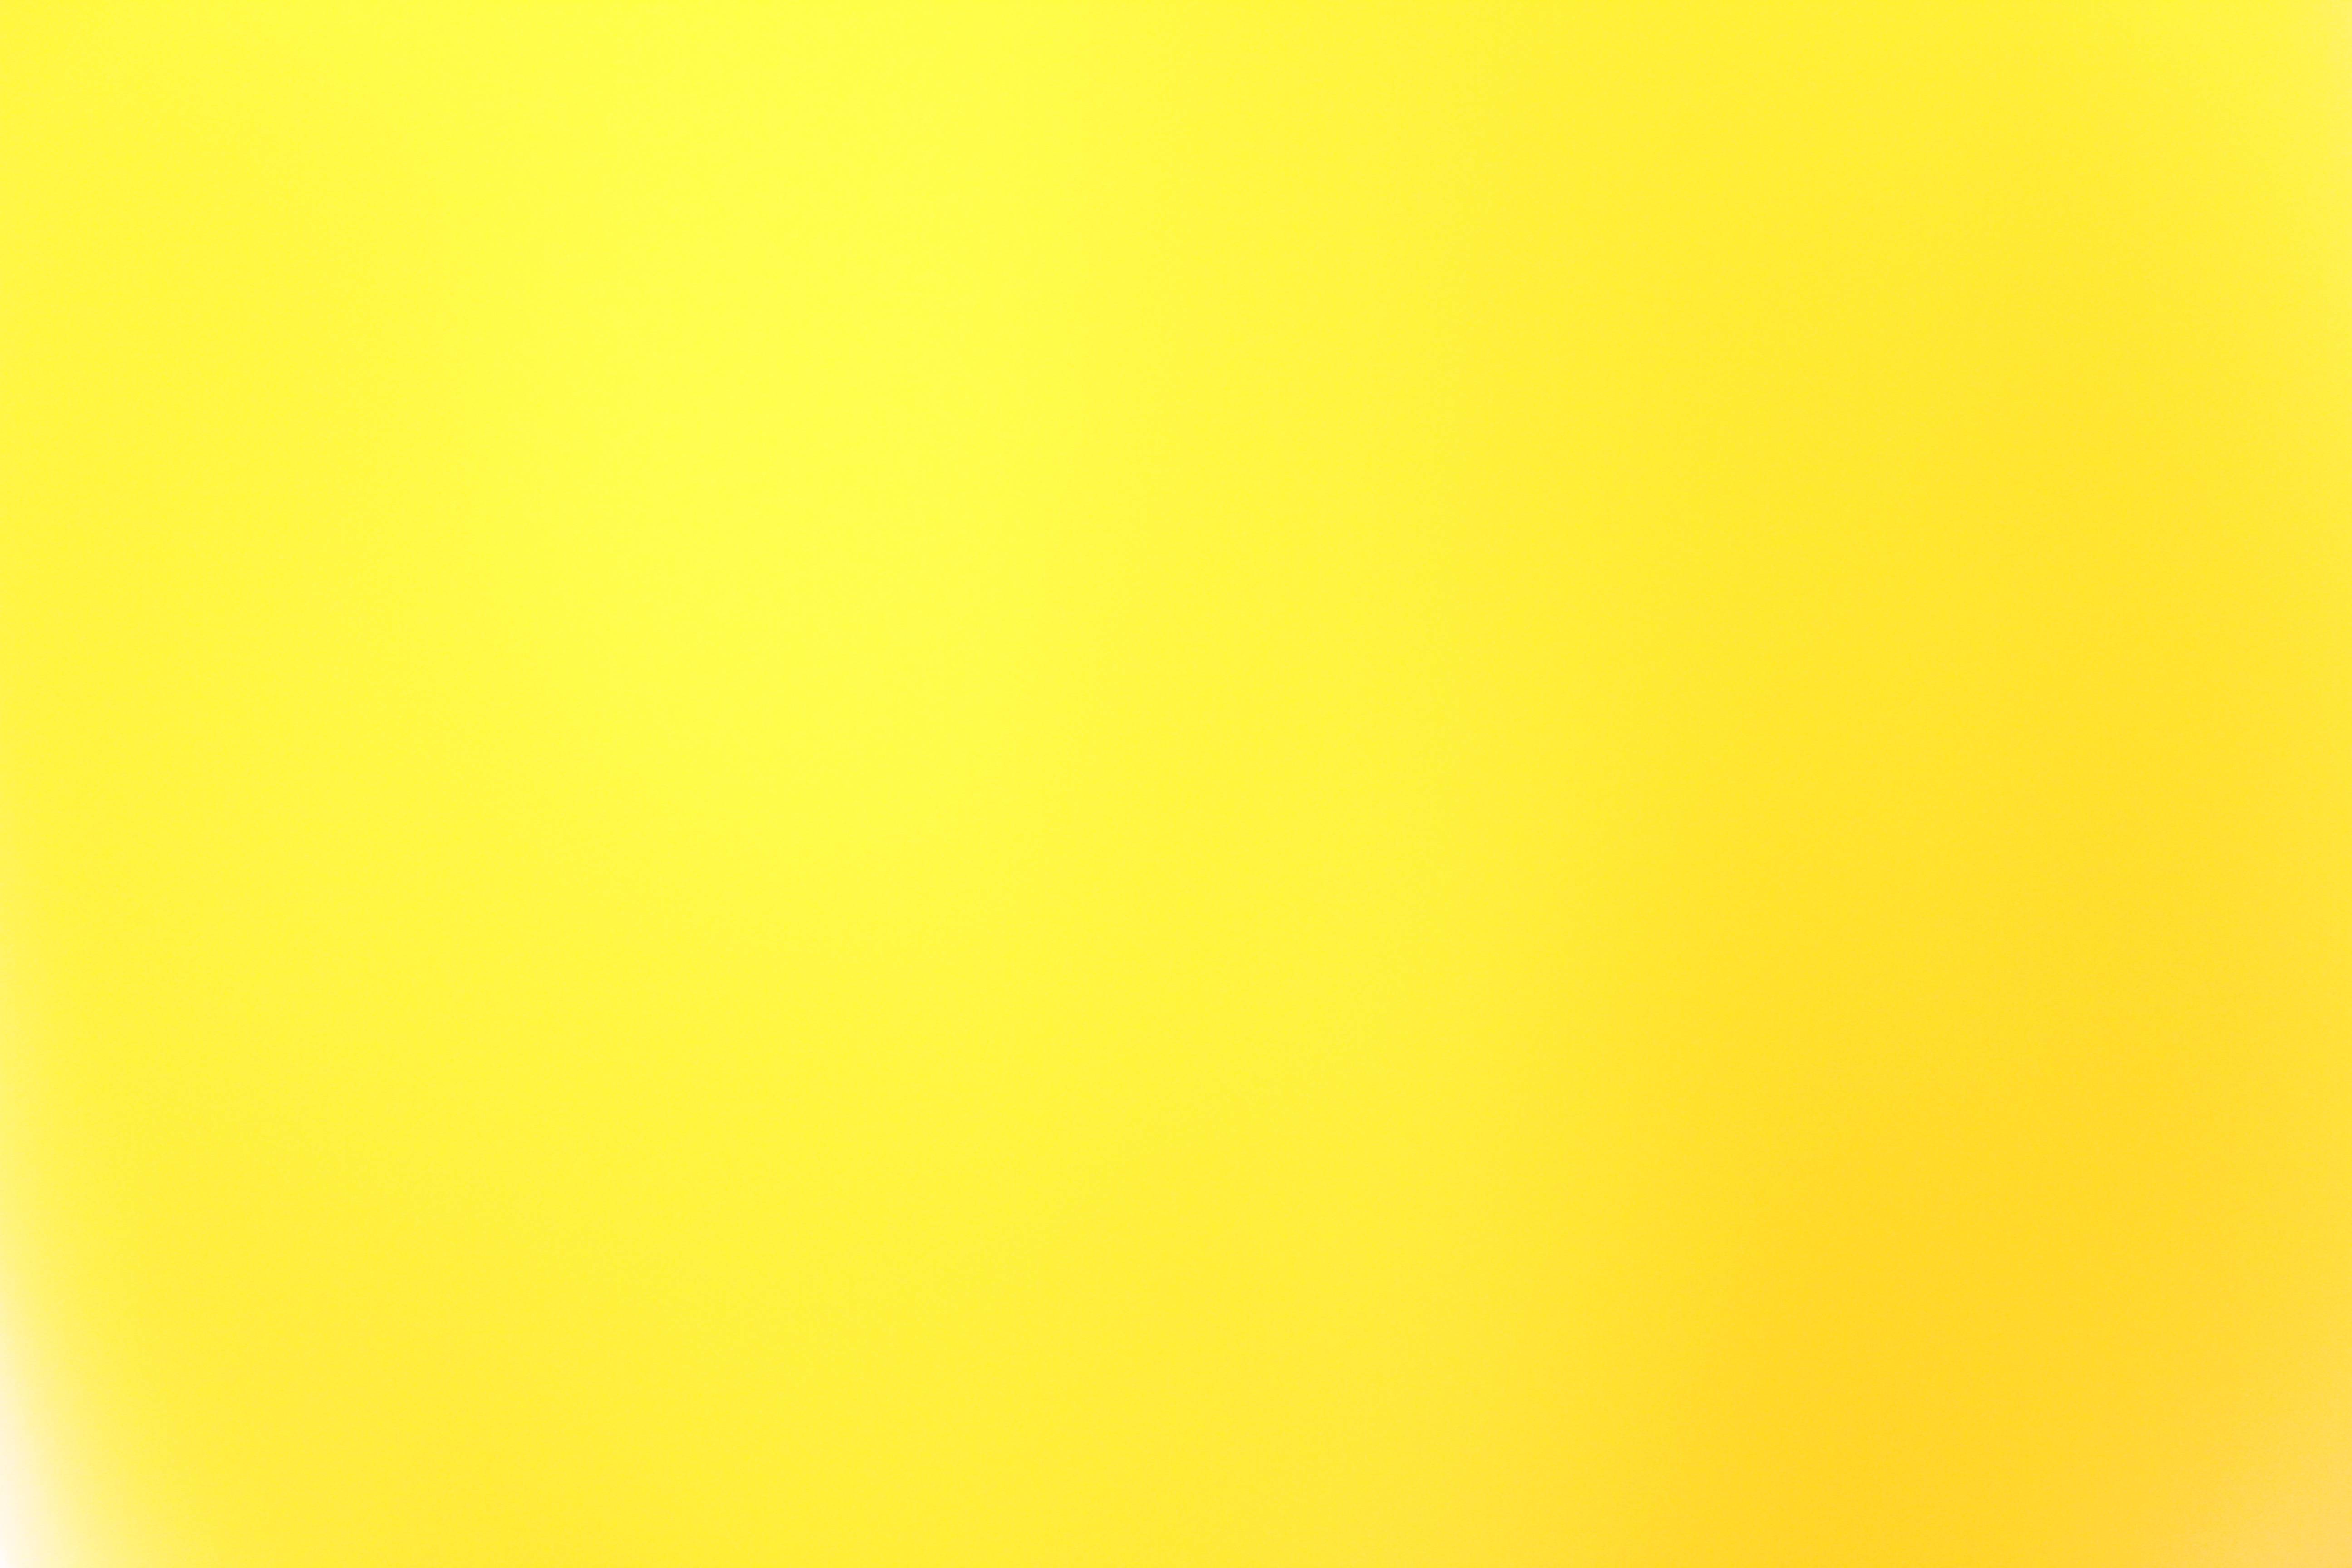 Wallpaper For Plain Yellow Background Image